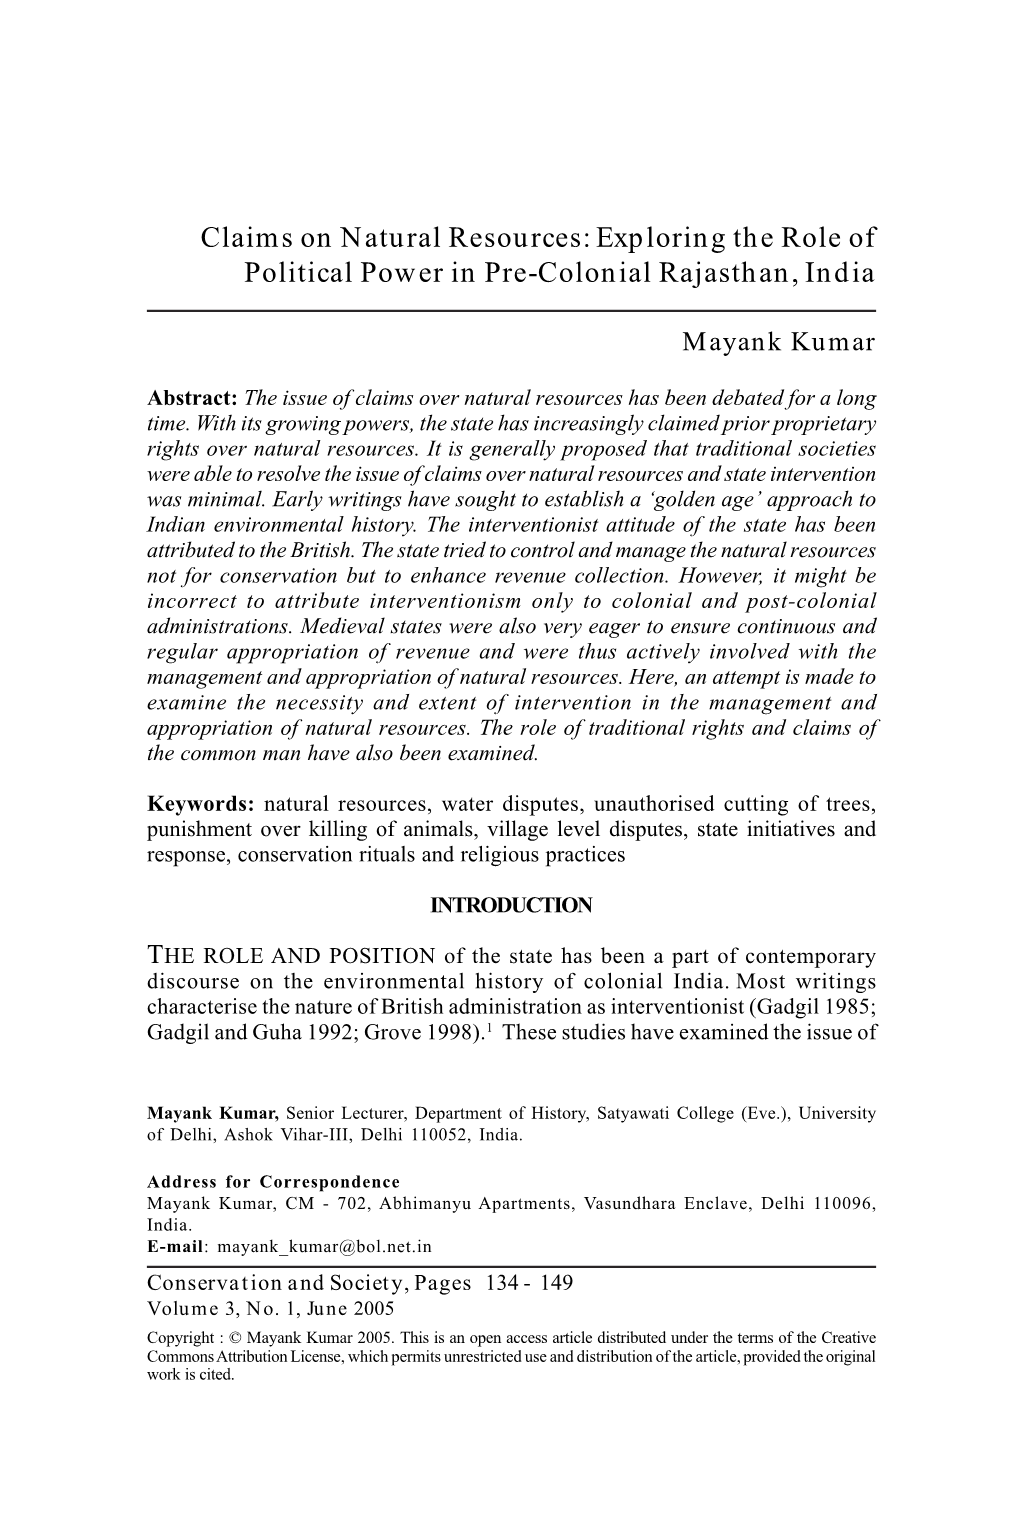 Claims on Natural Resources: Exploring the Role of Political Power in Pre-Colonial Rajasthan, India